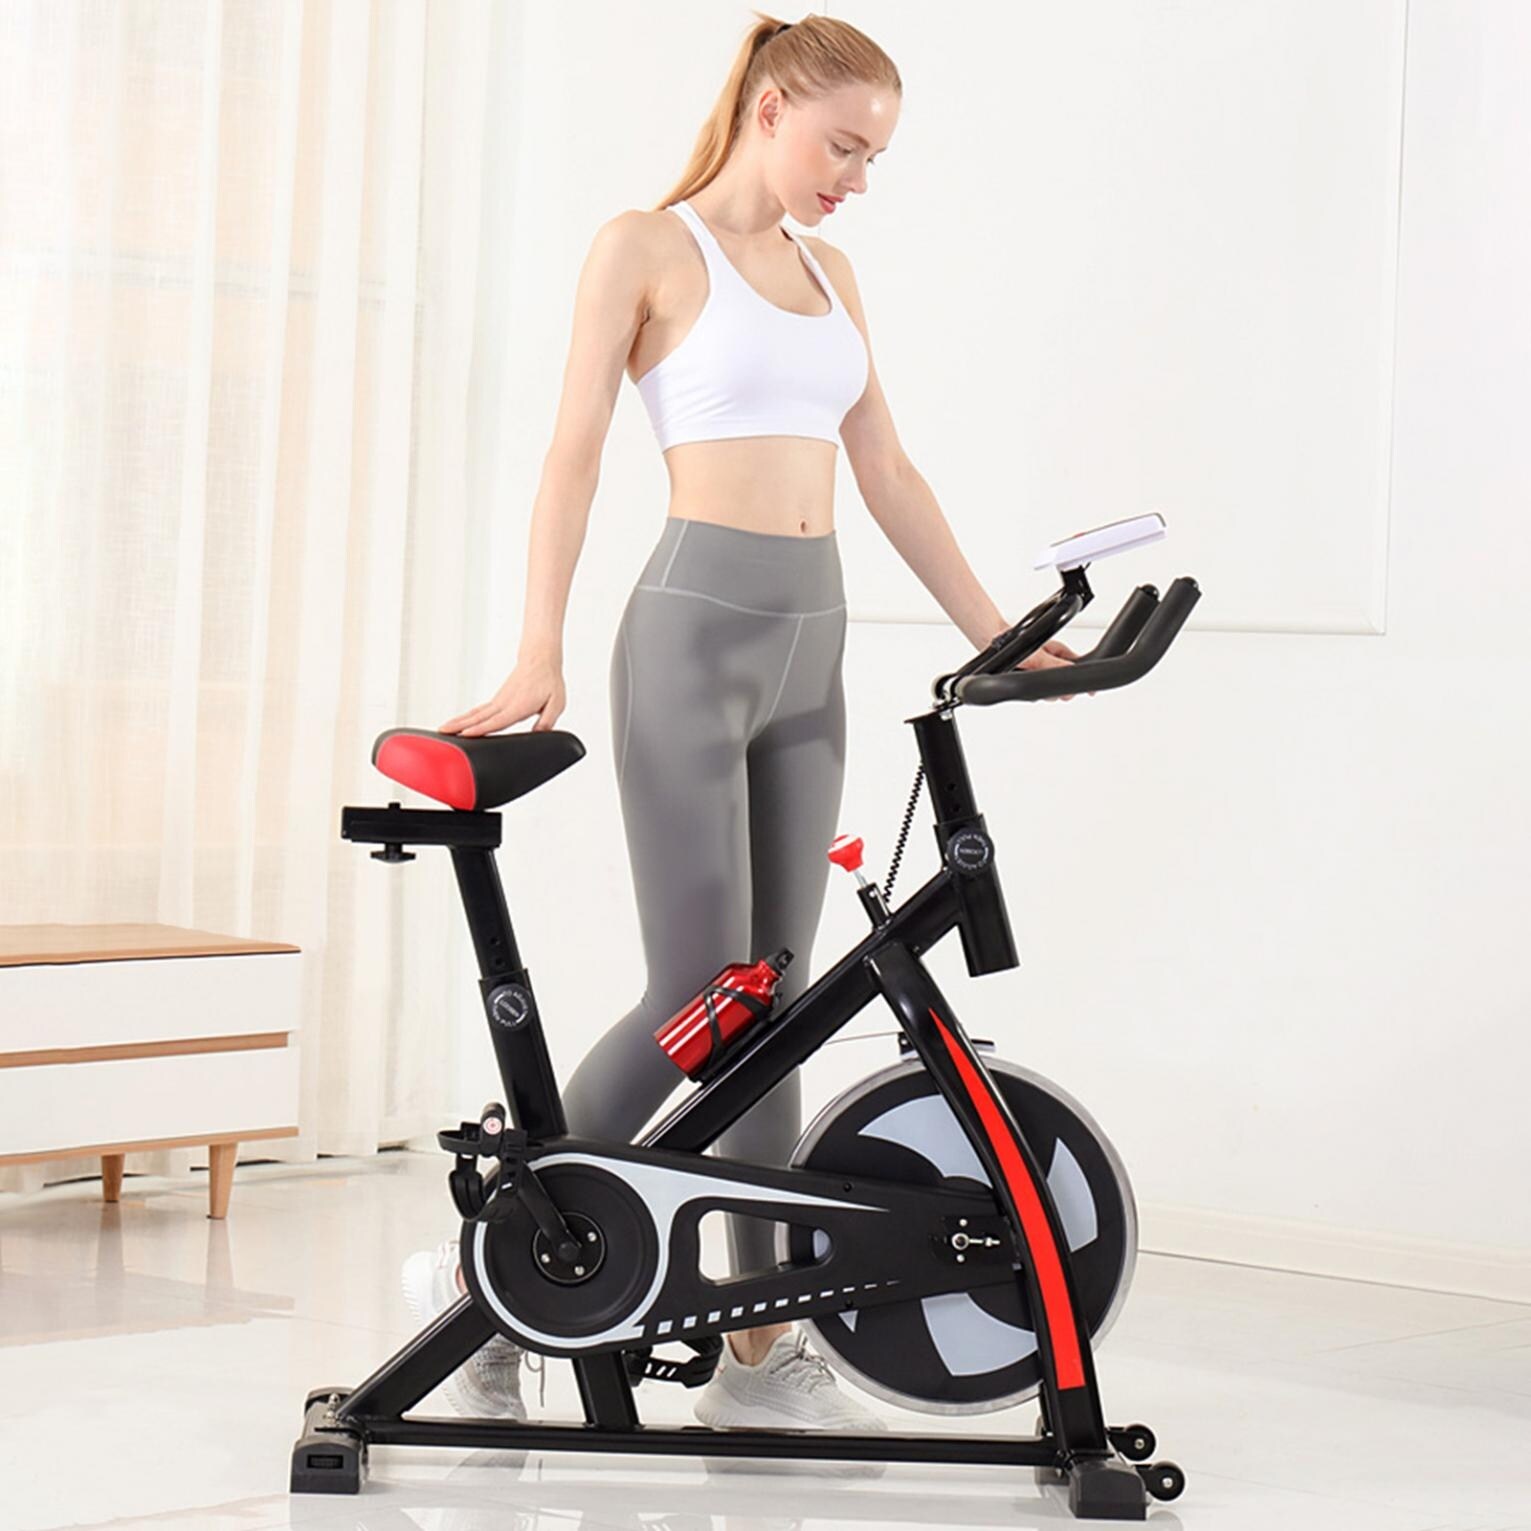 Details about   NEW Home gym equipment indoor magnetic control exercise bike super quiet US 